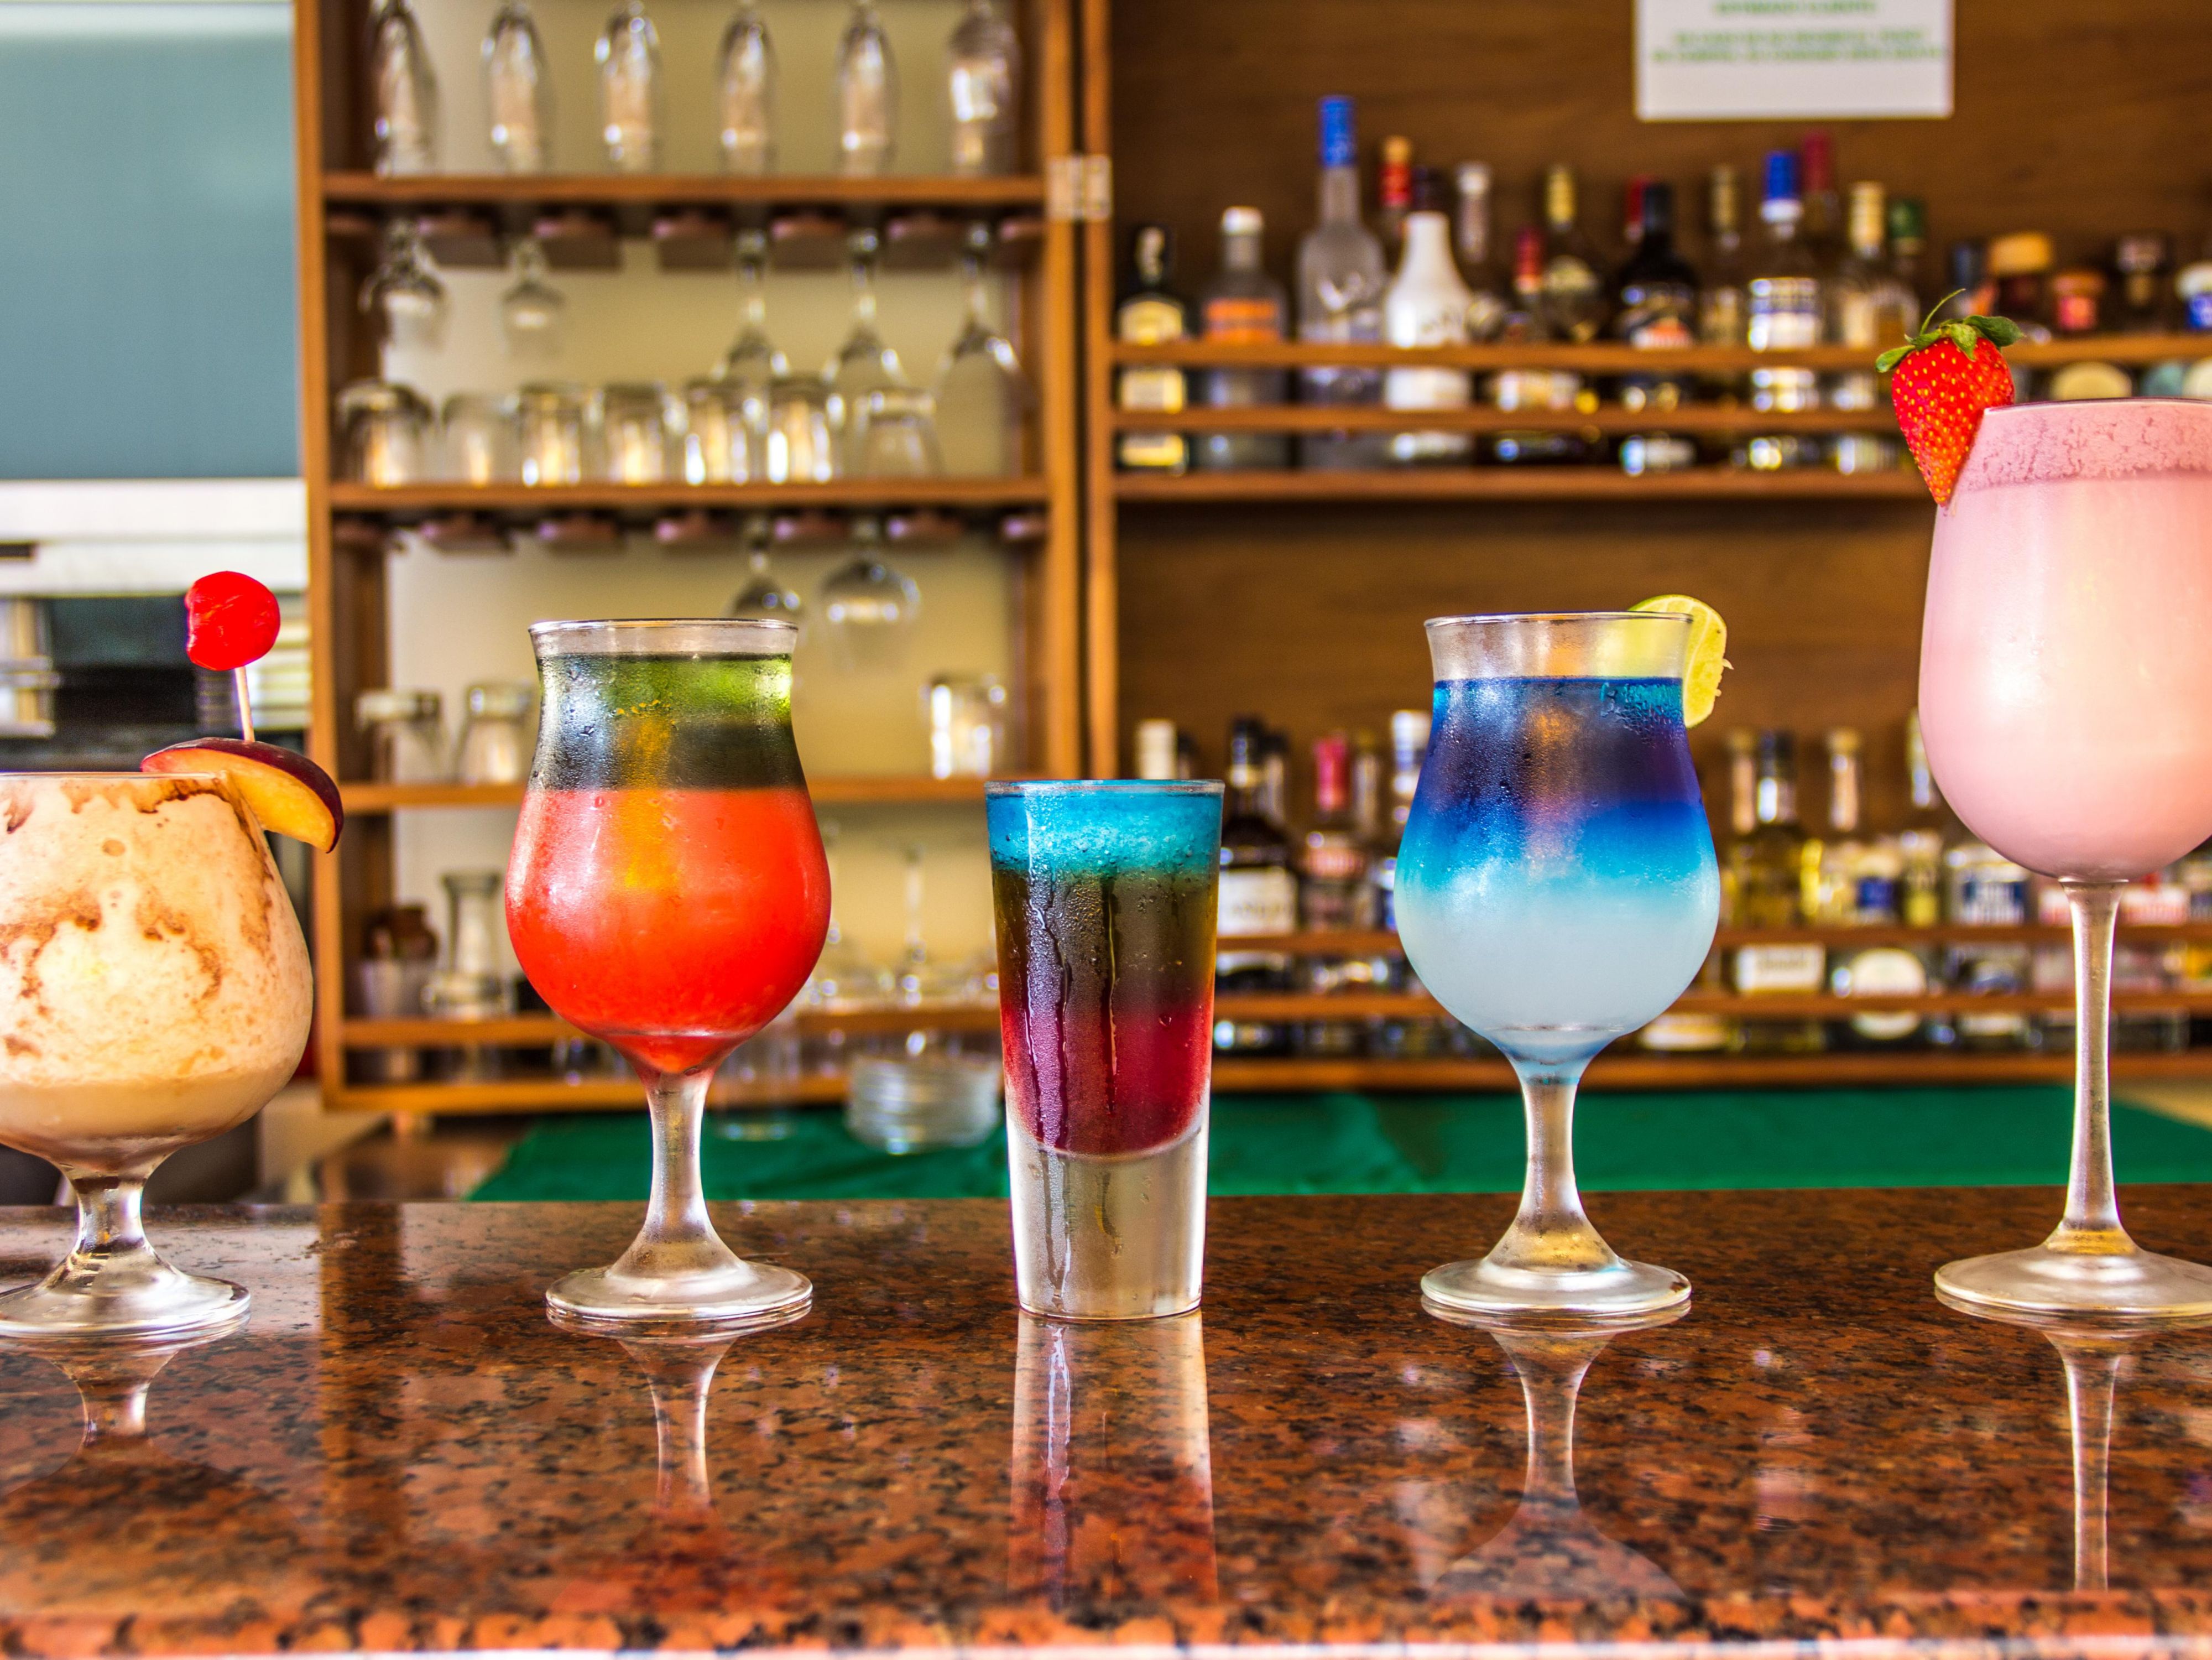 Enjoy an ice cold tropical beverage. Our Darsena Bar is open for lunch and dinner.